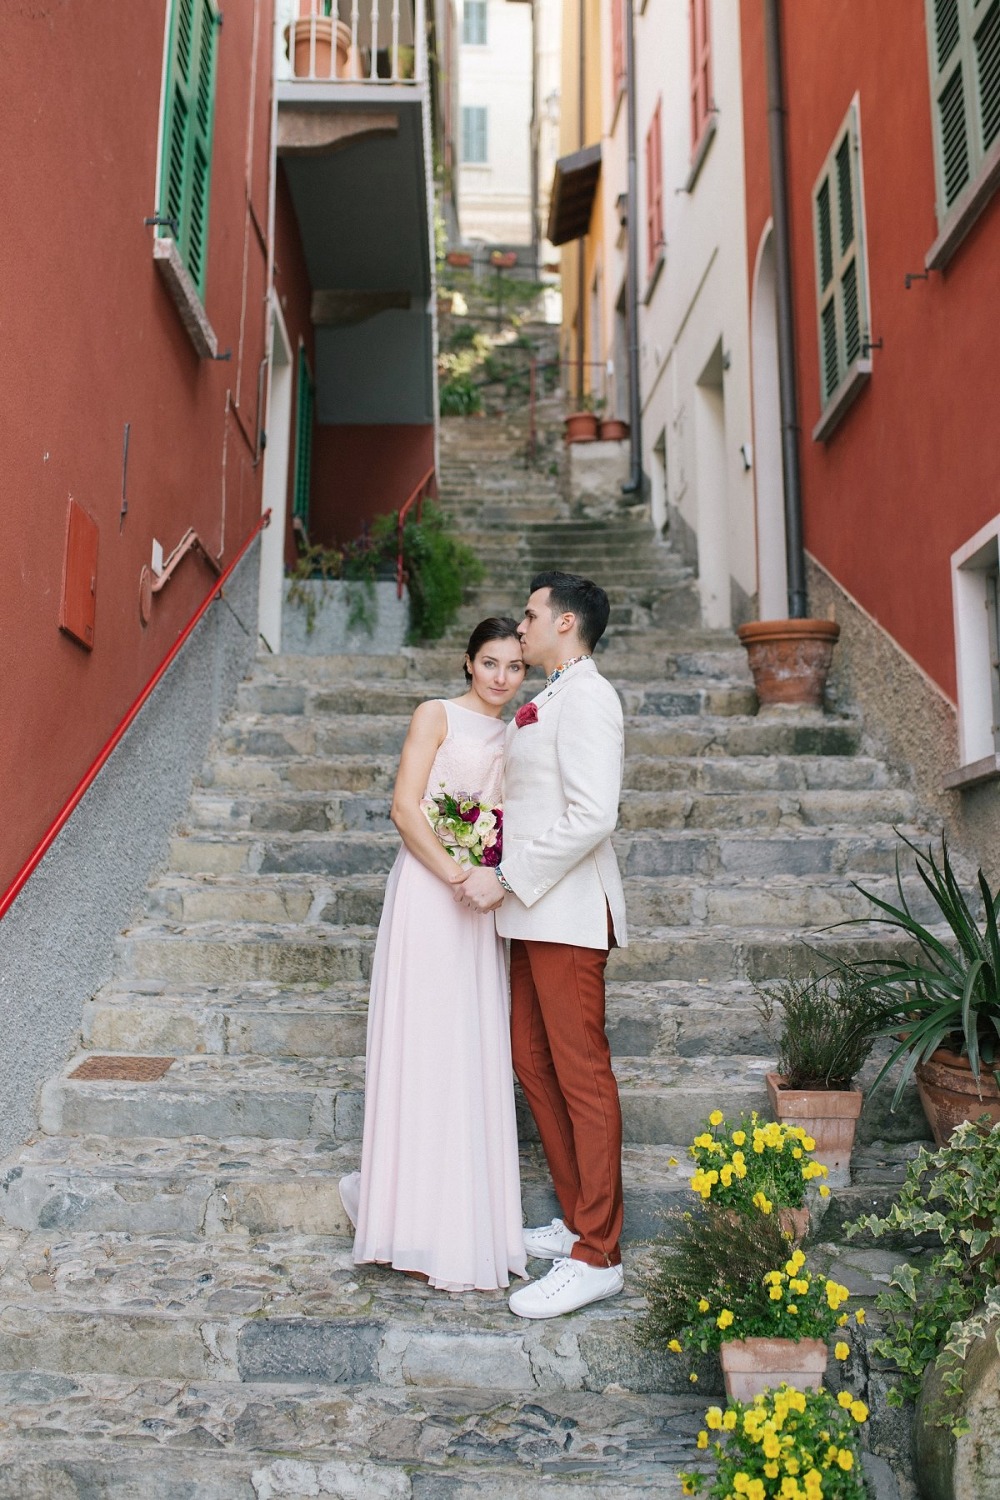 586374 A Surprise Engagement In Italy That S